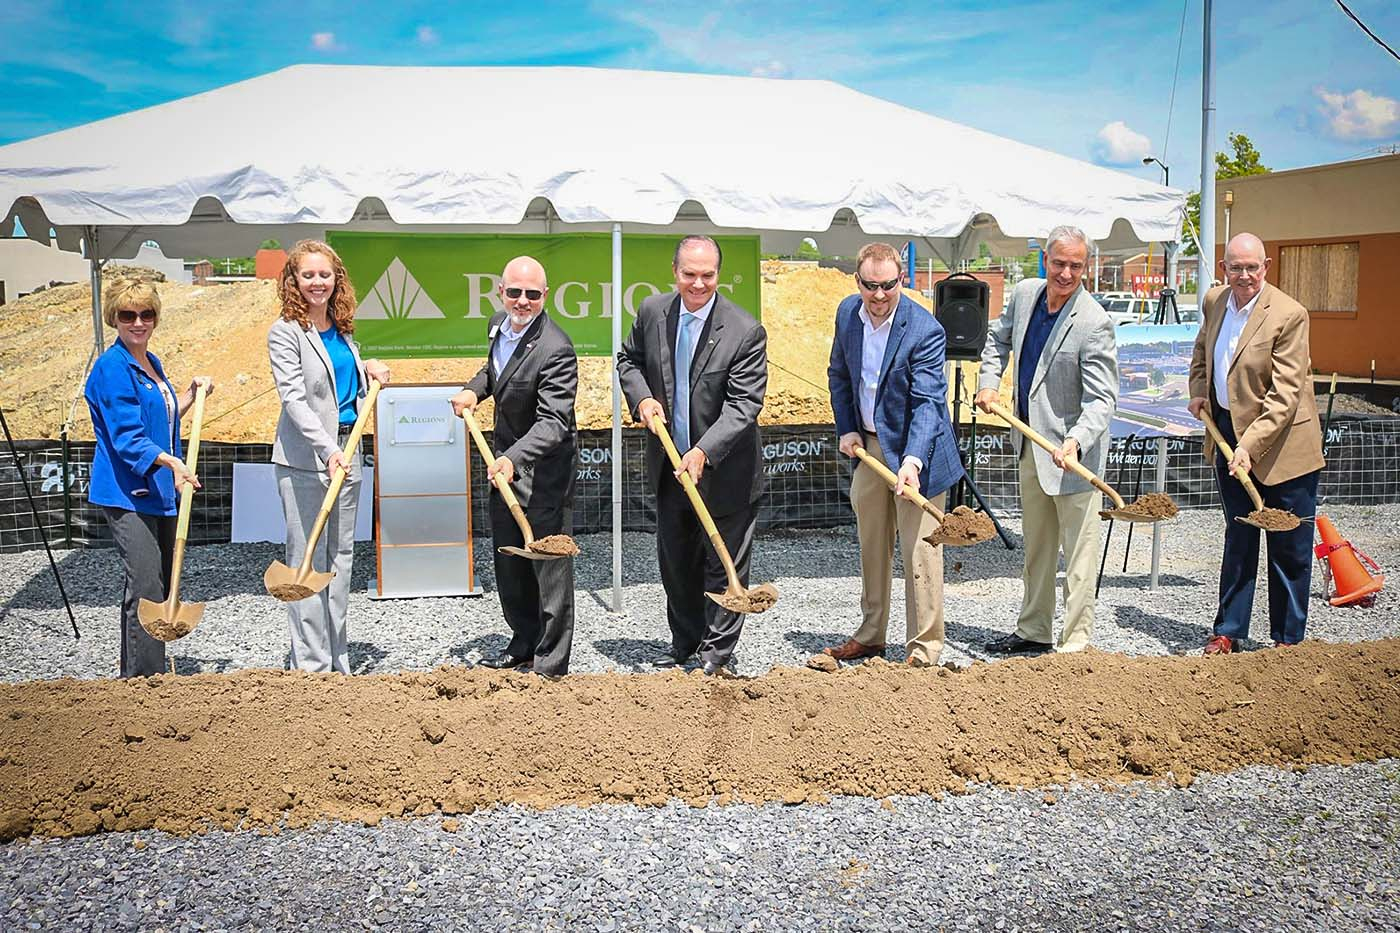 ground-breaking ceremony for Regions Bank